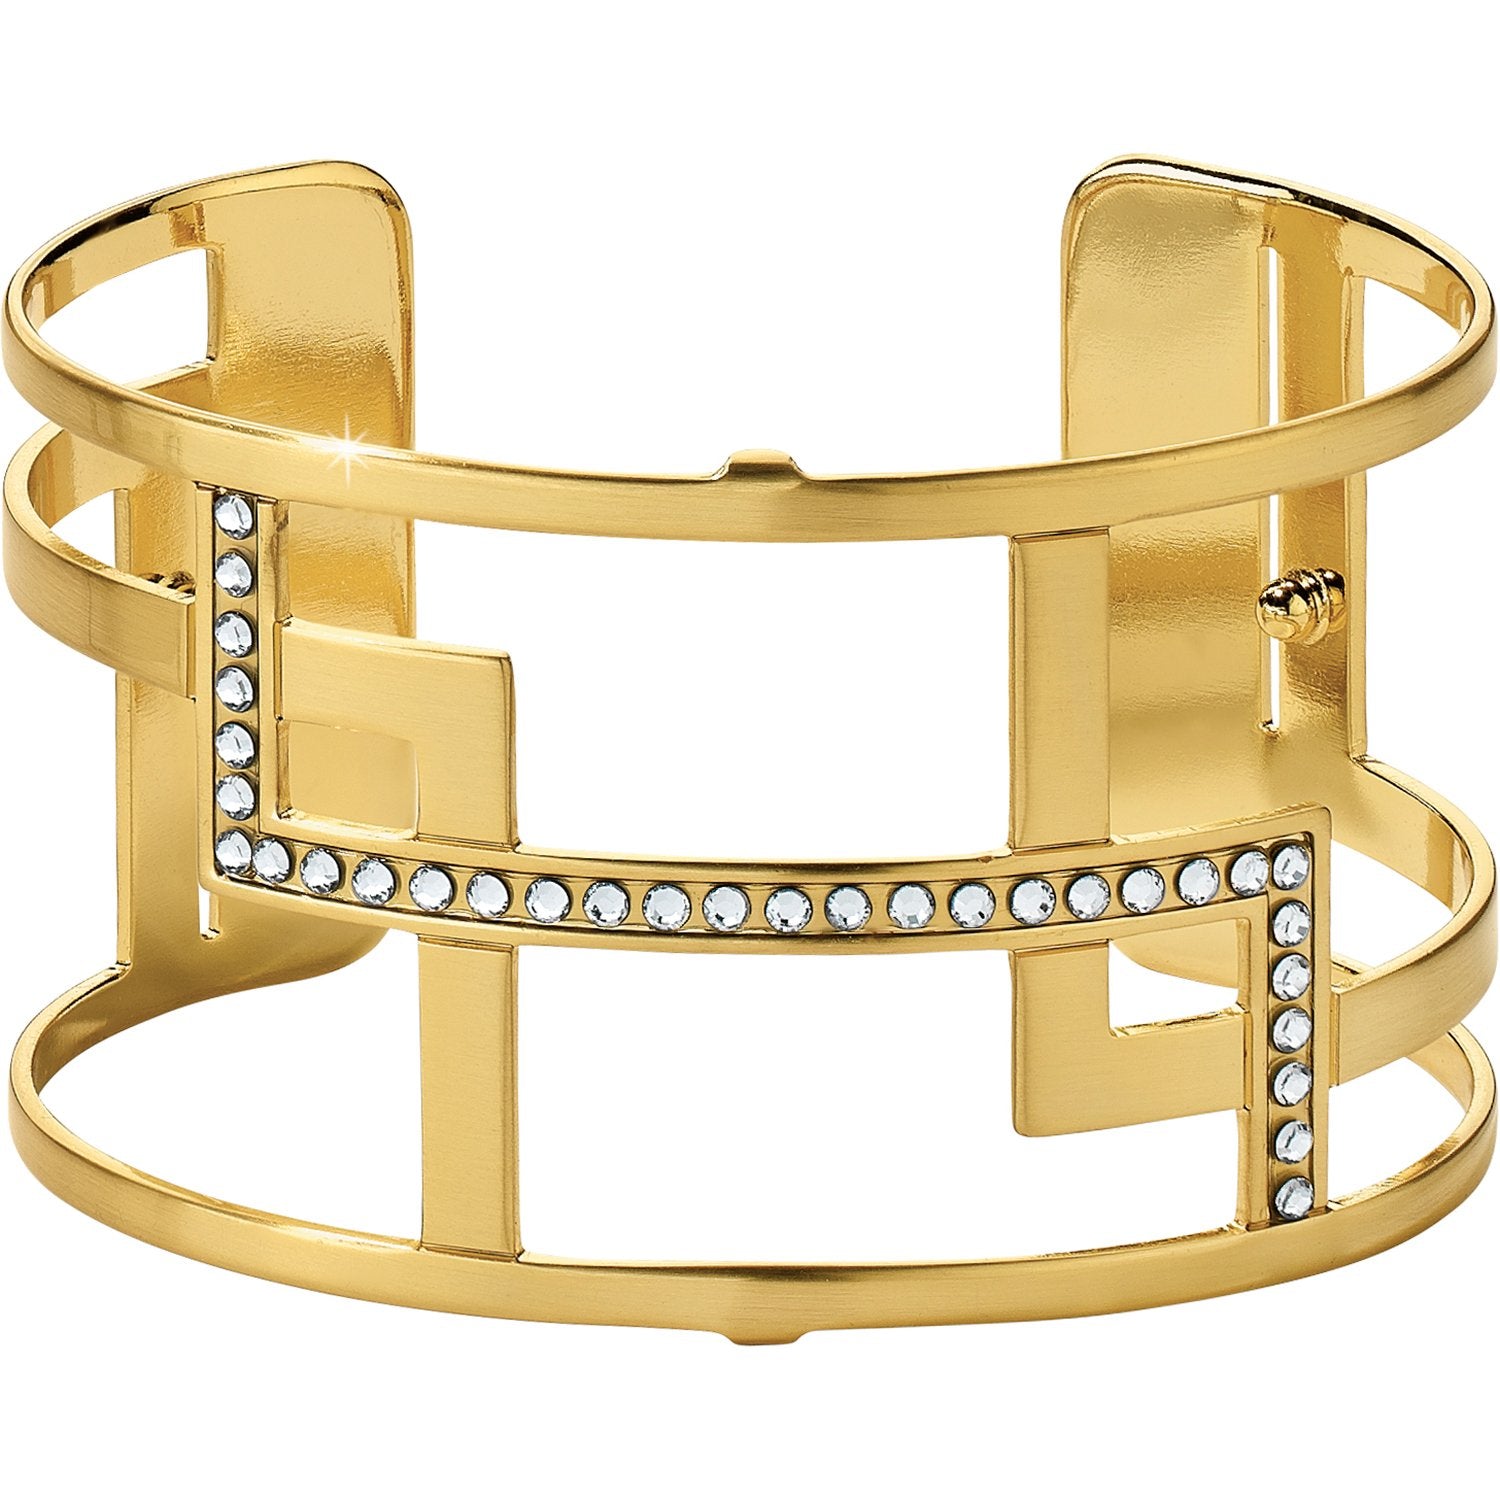 Christo Nile Wide Cuff Bracelet Front View